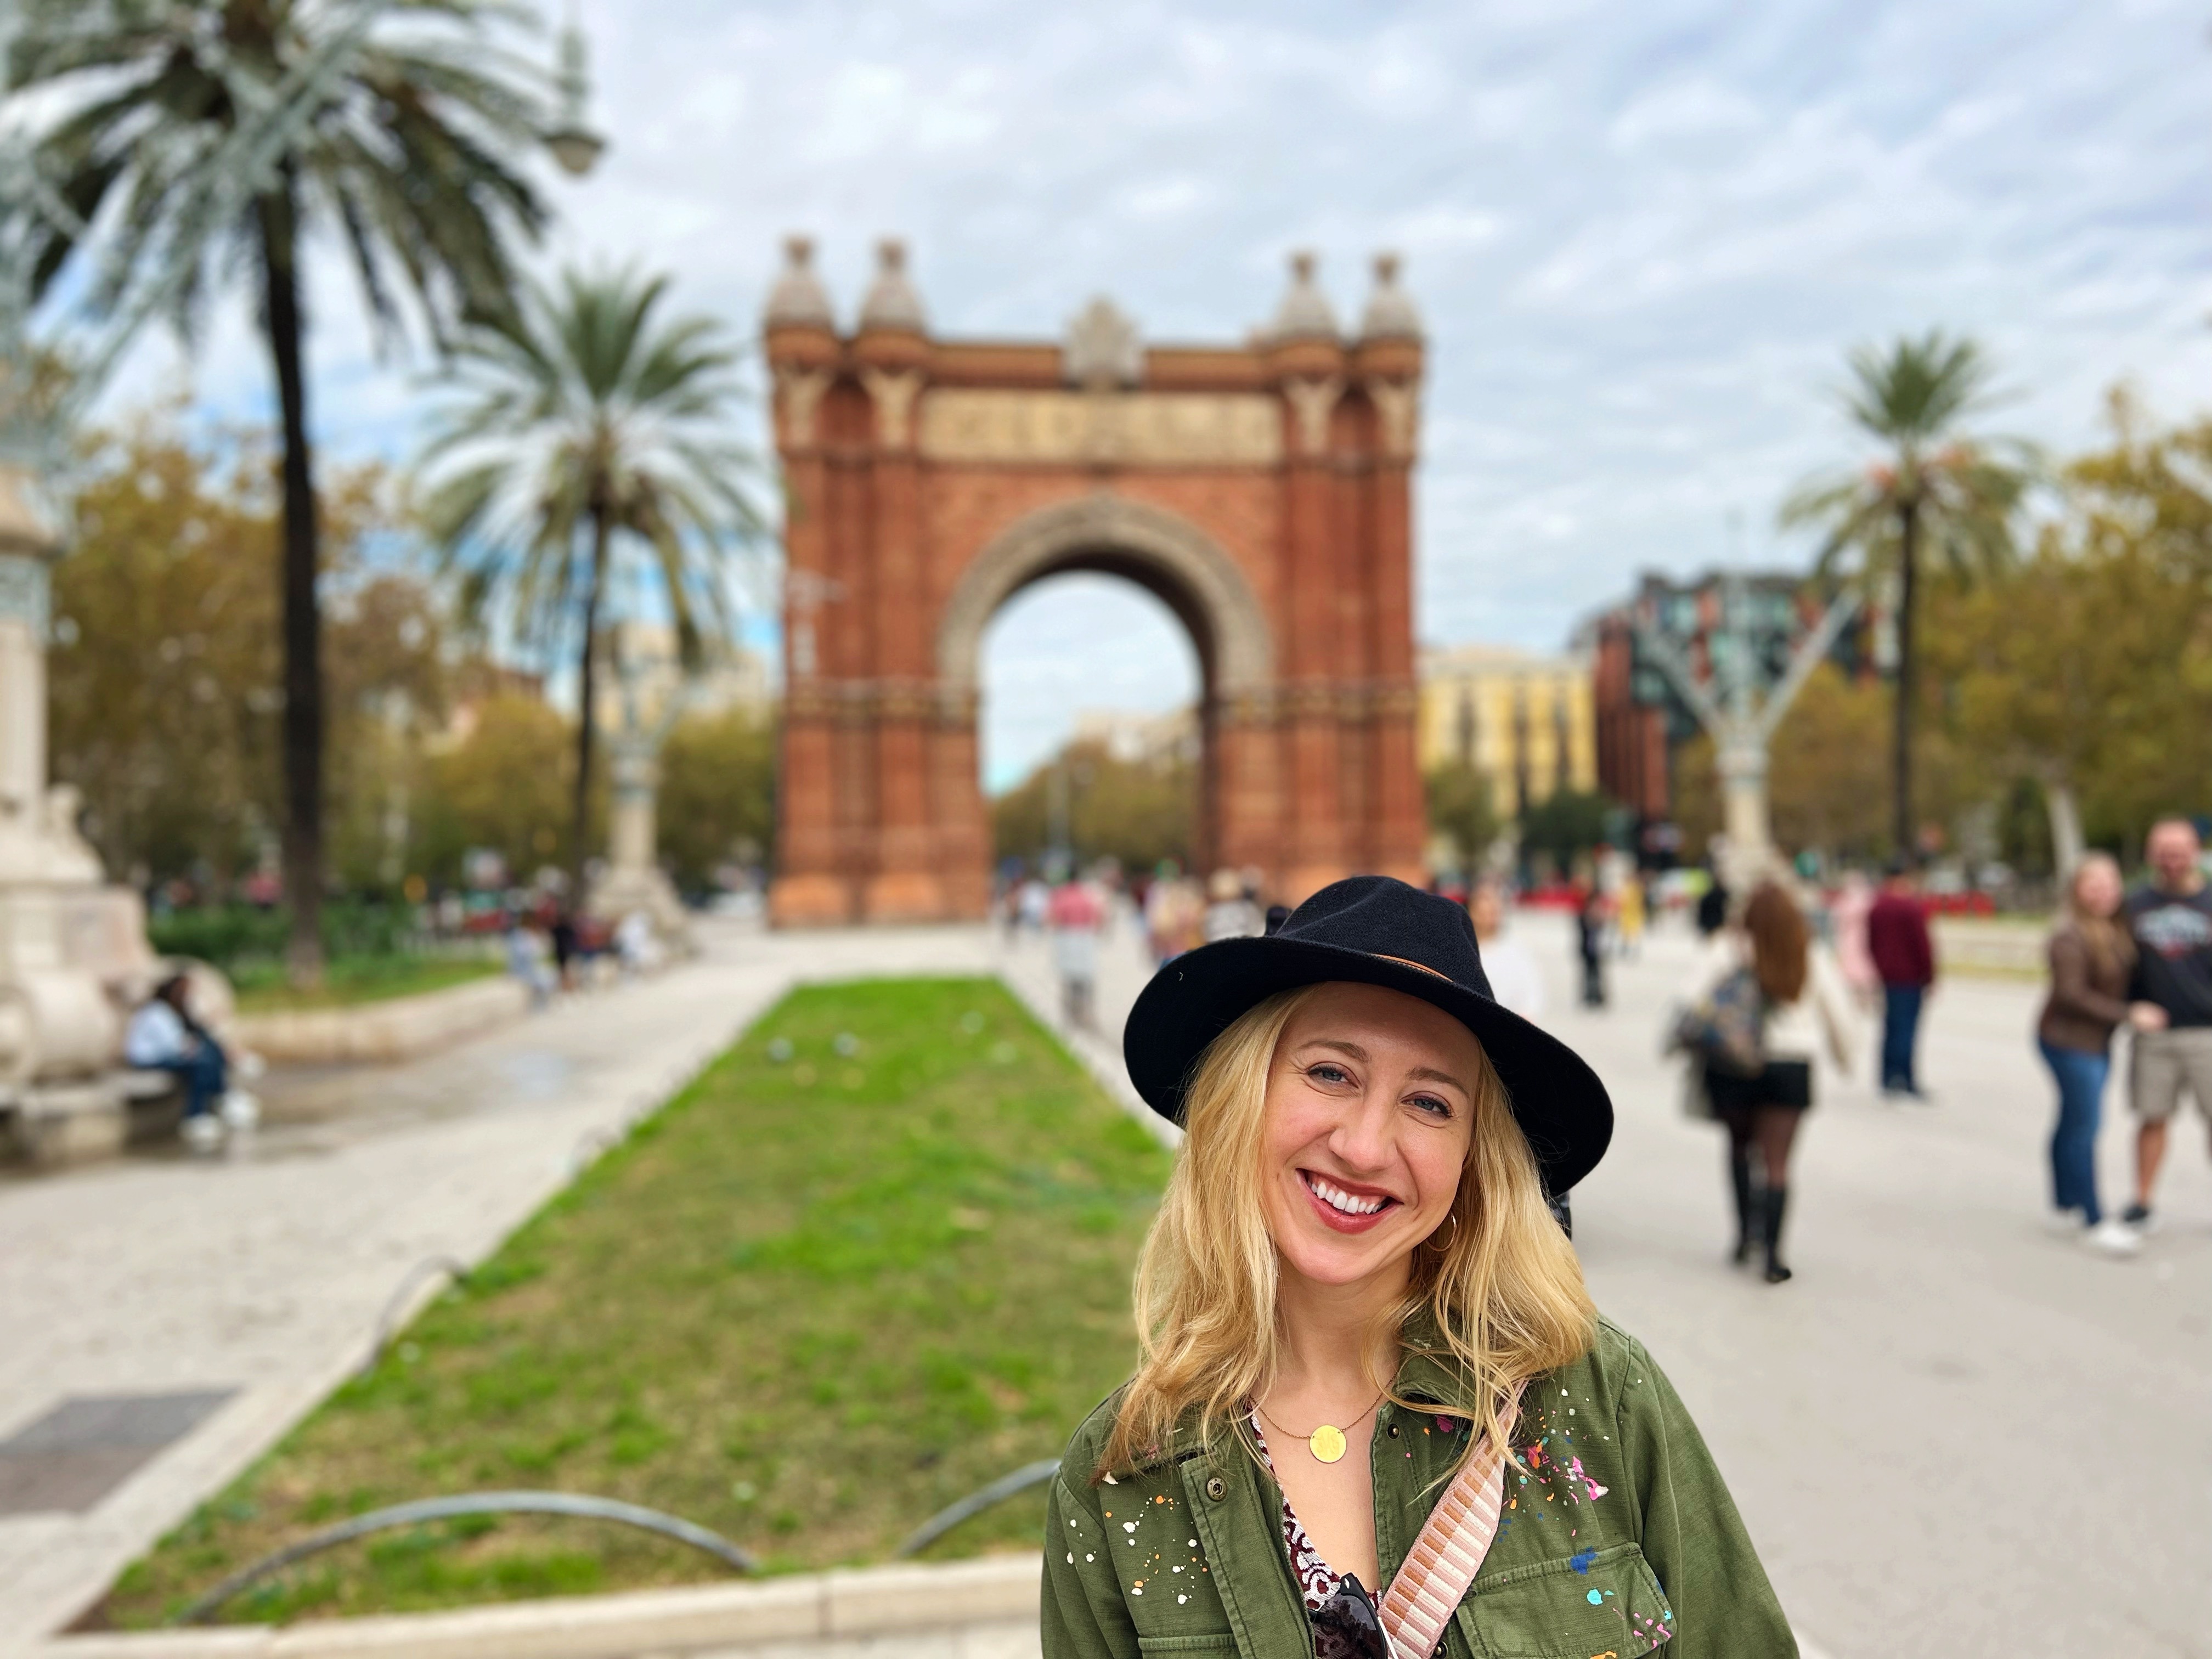 A woman posing in front of a beautiful gate